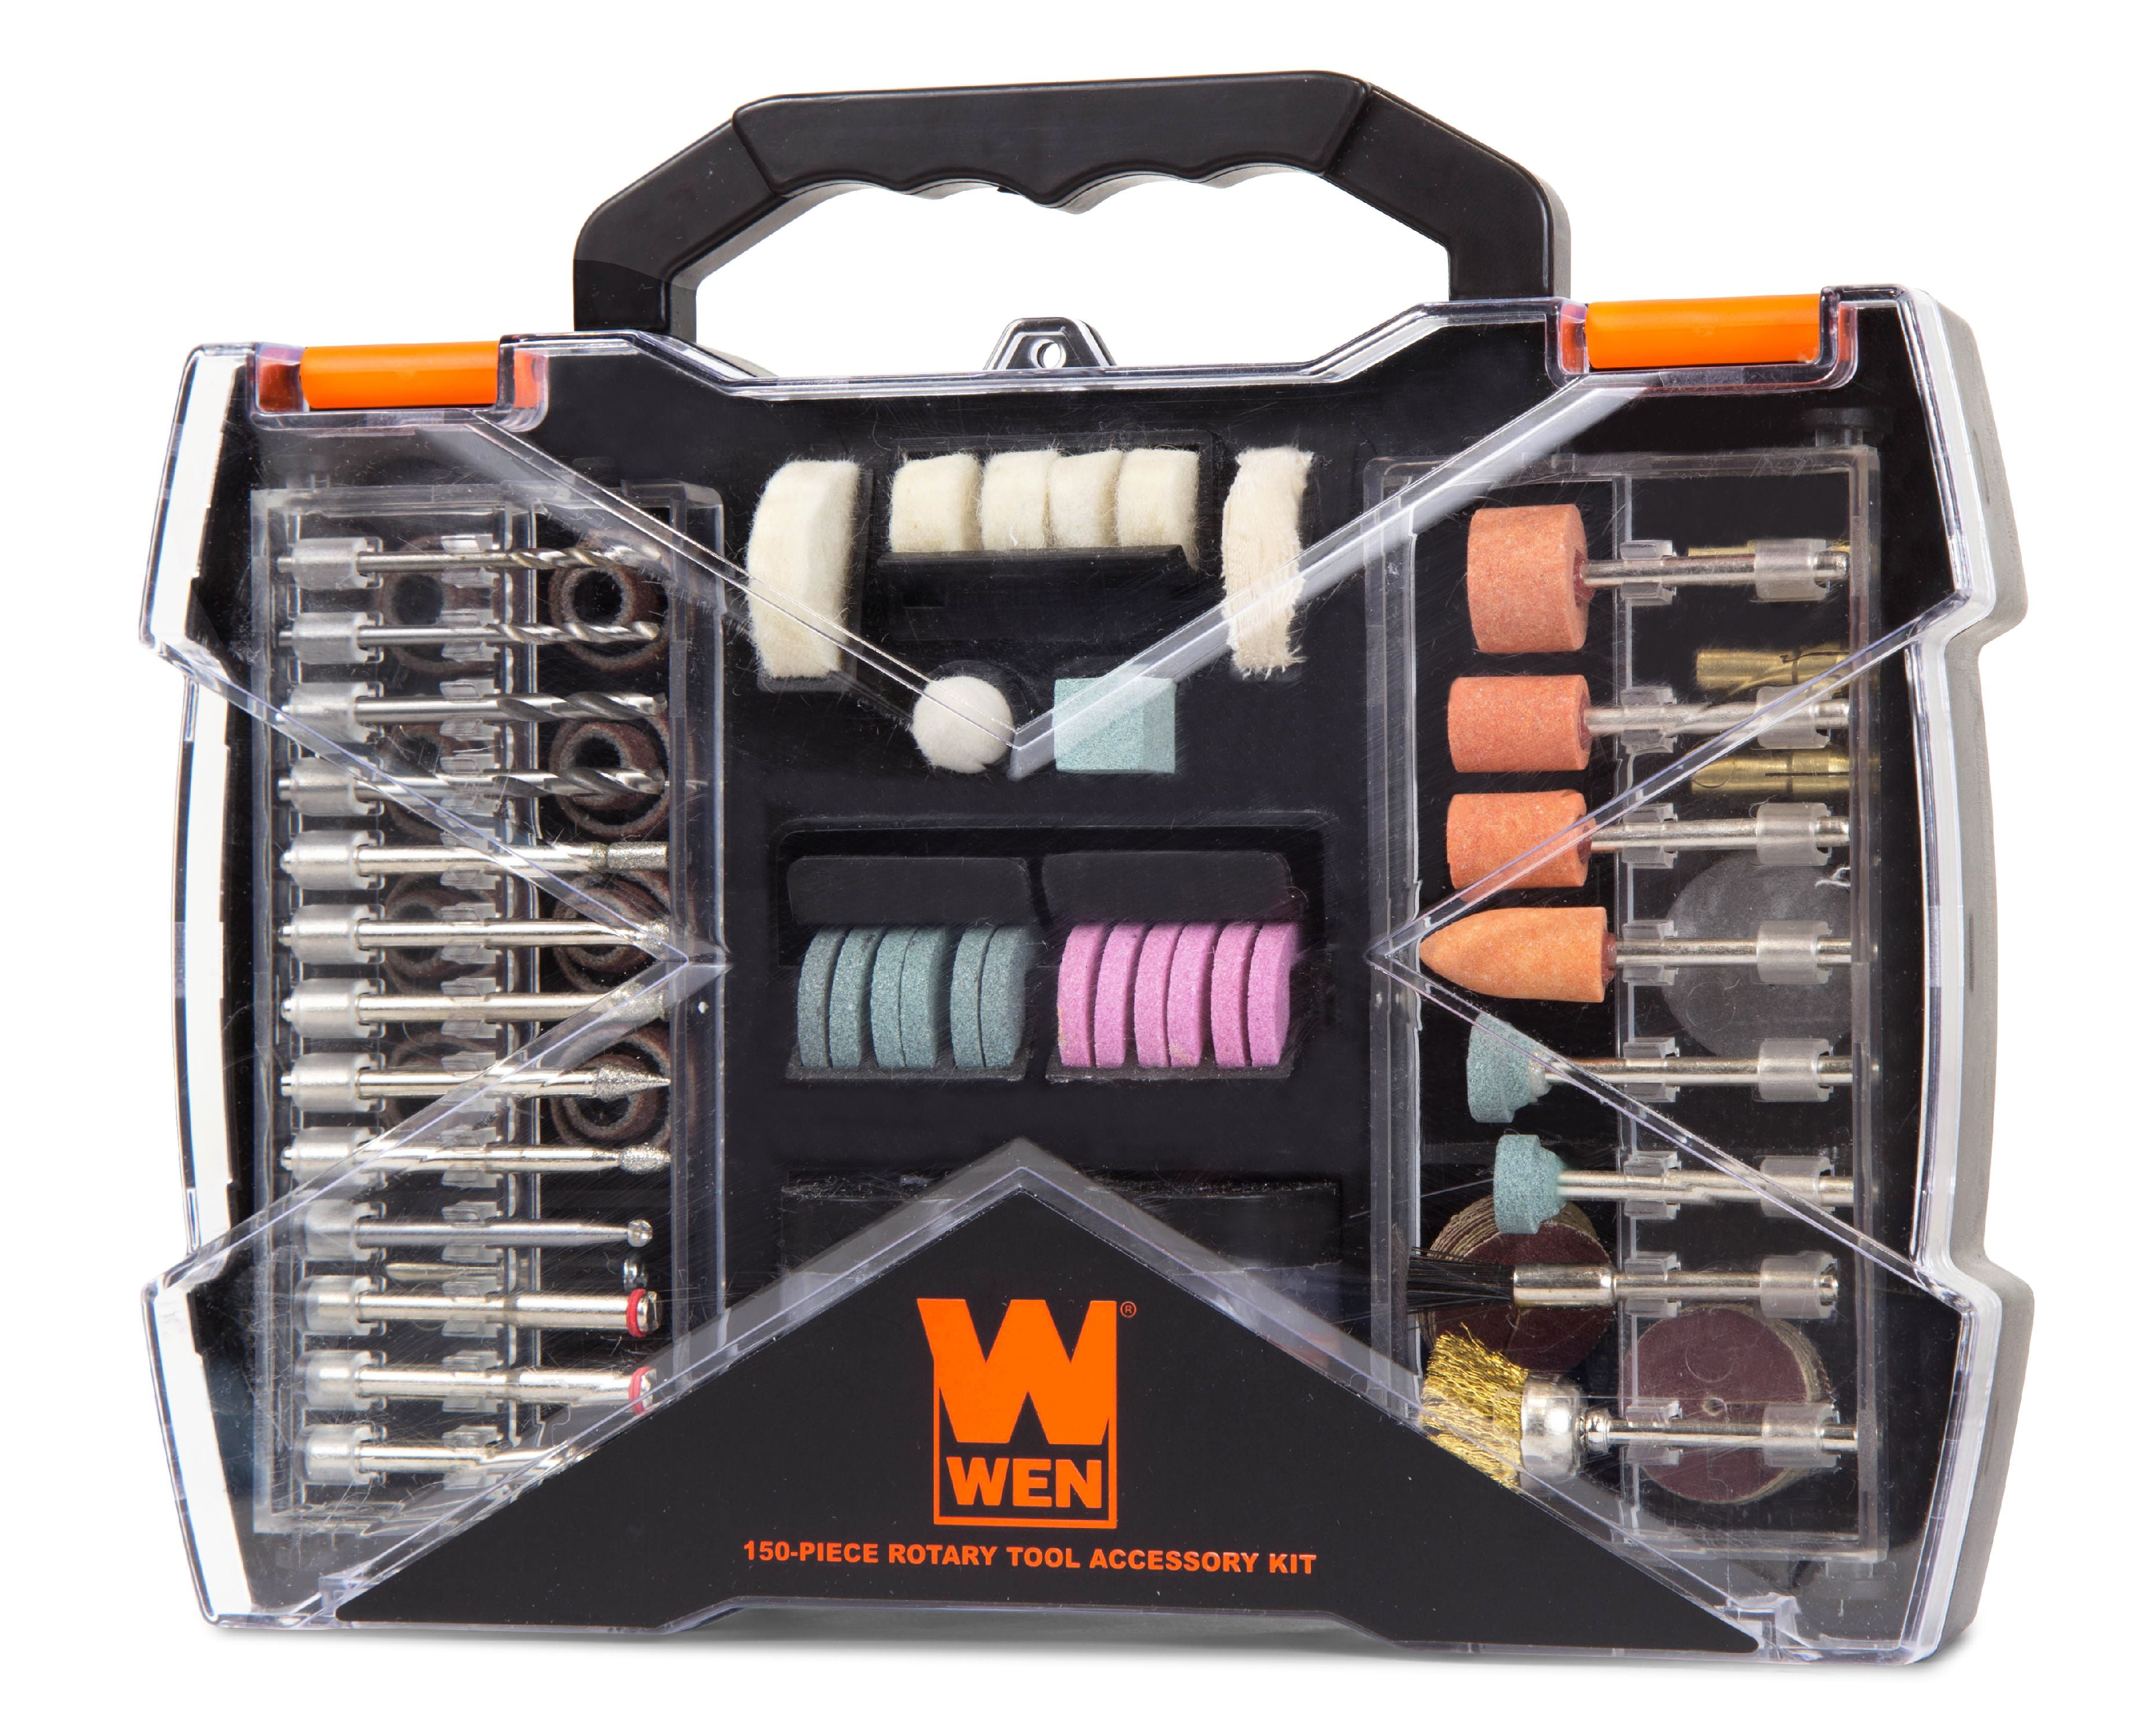 MakeITHappen Rotary Tool Accessory Kit, 150 Piece